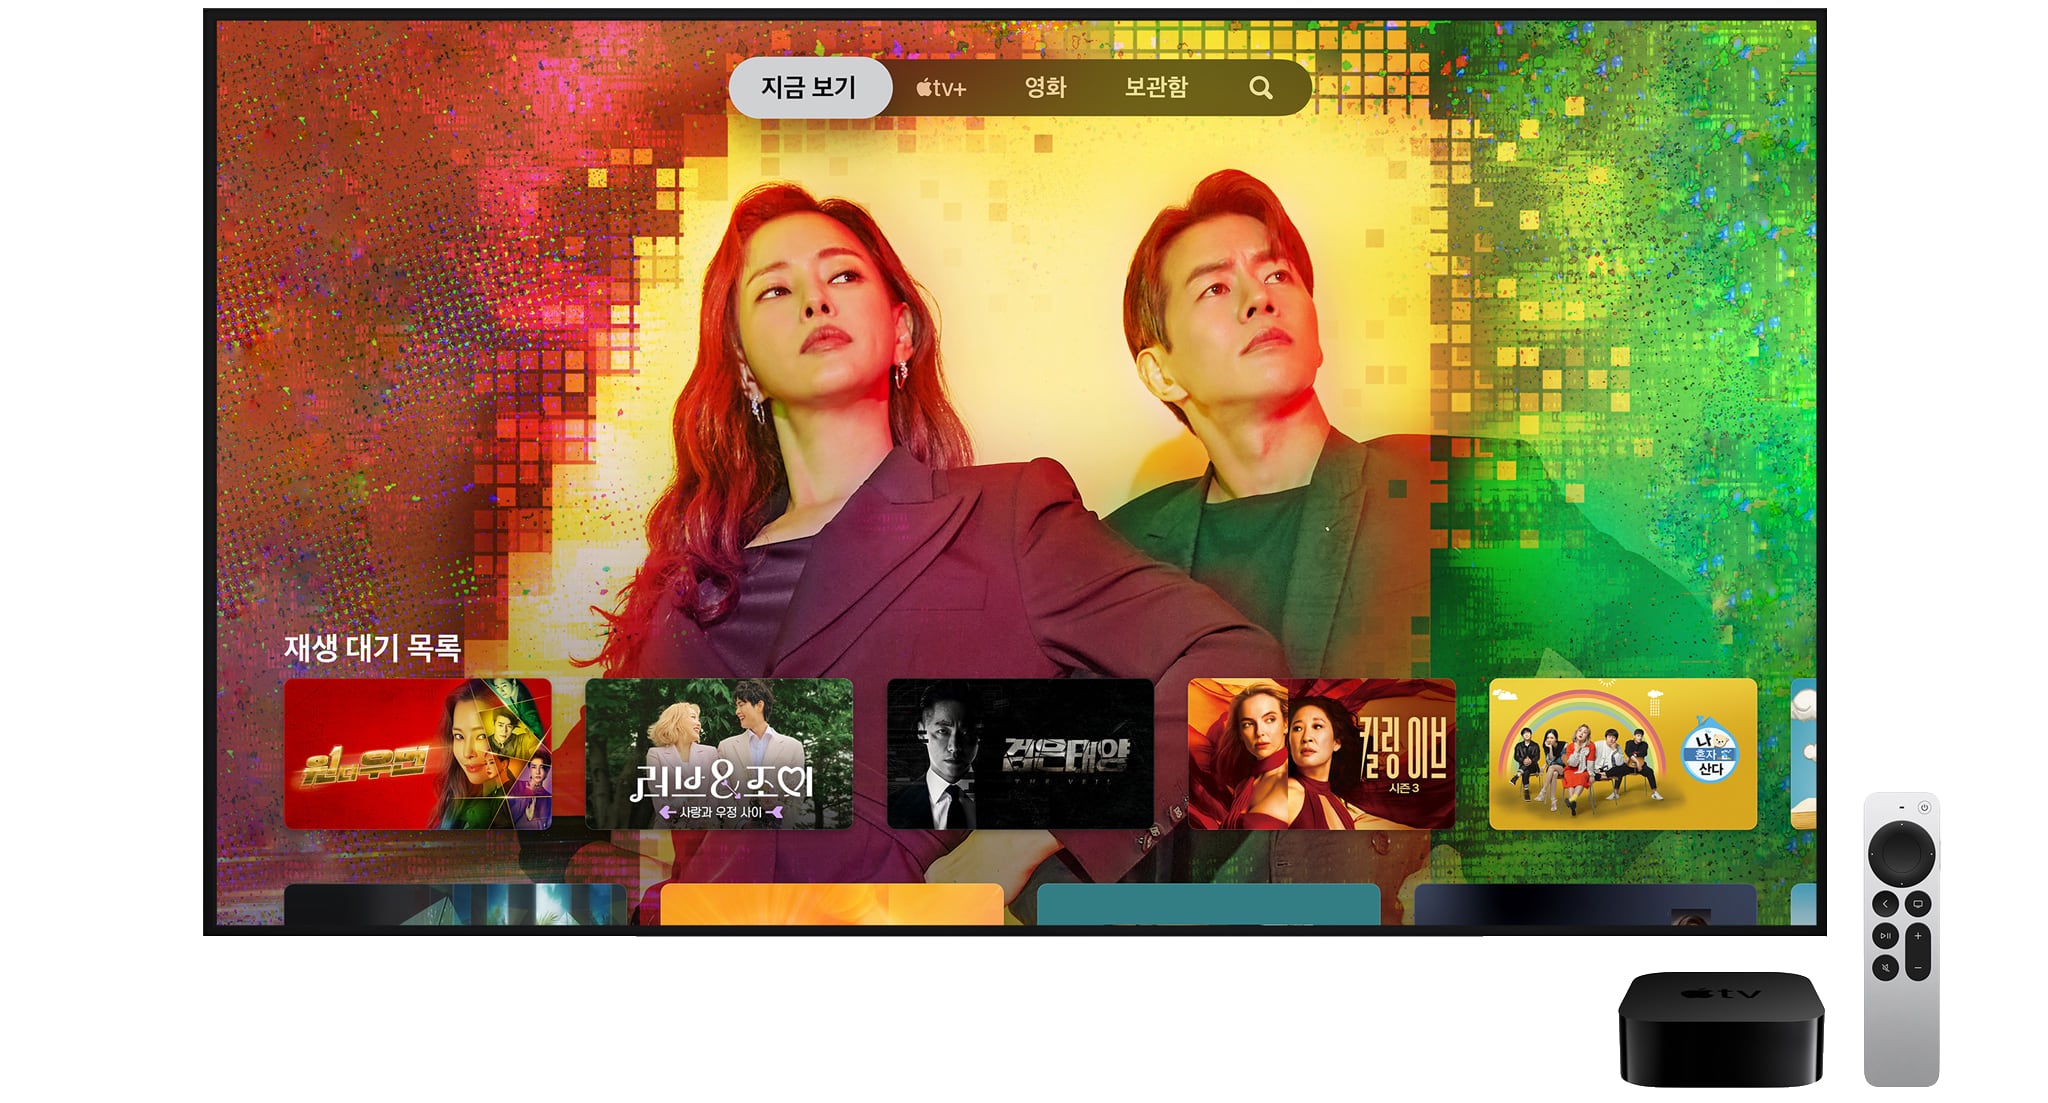 Apple's marketing image showing Apple TV 4K with the TV app displaying local Korean content